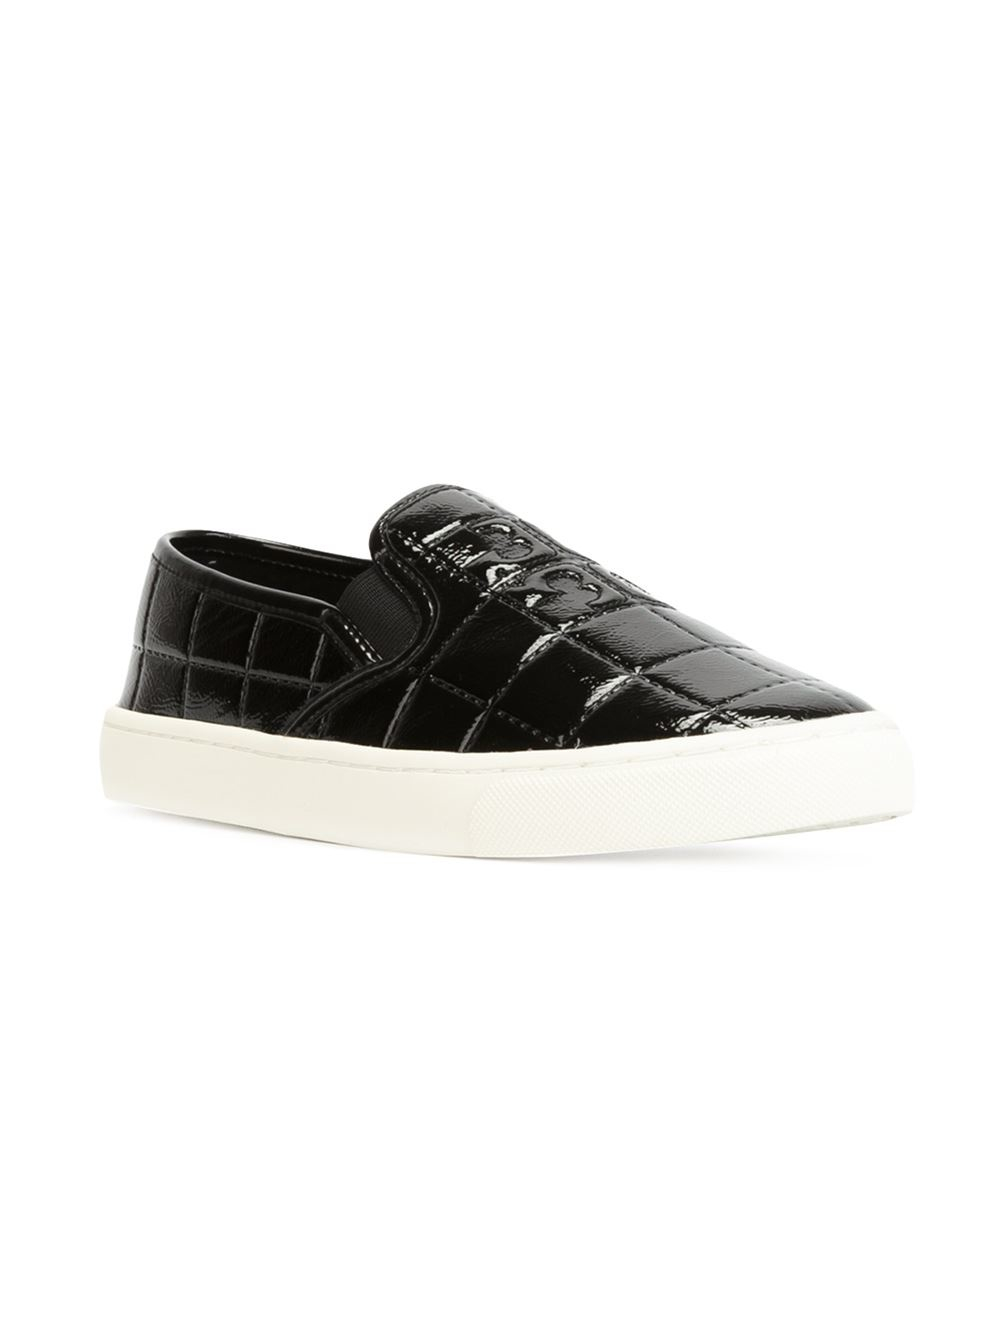 Tory Burch Quilted Slip On Sneakers in Black - Lyst